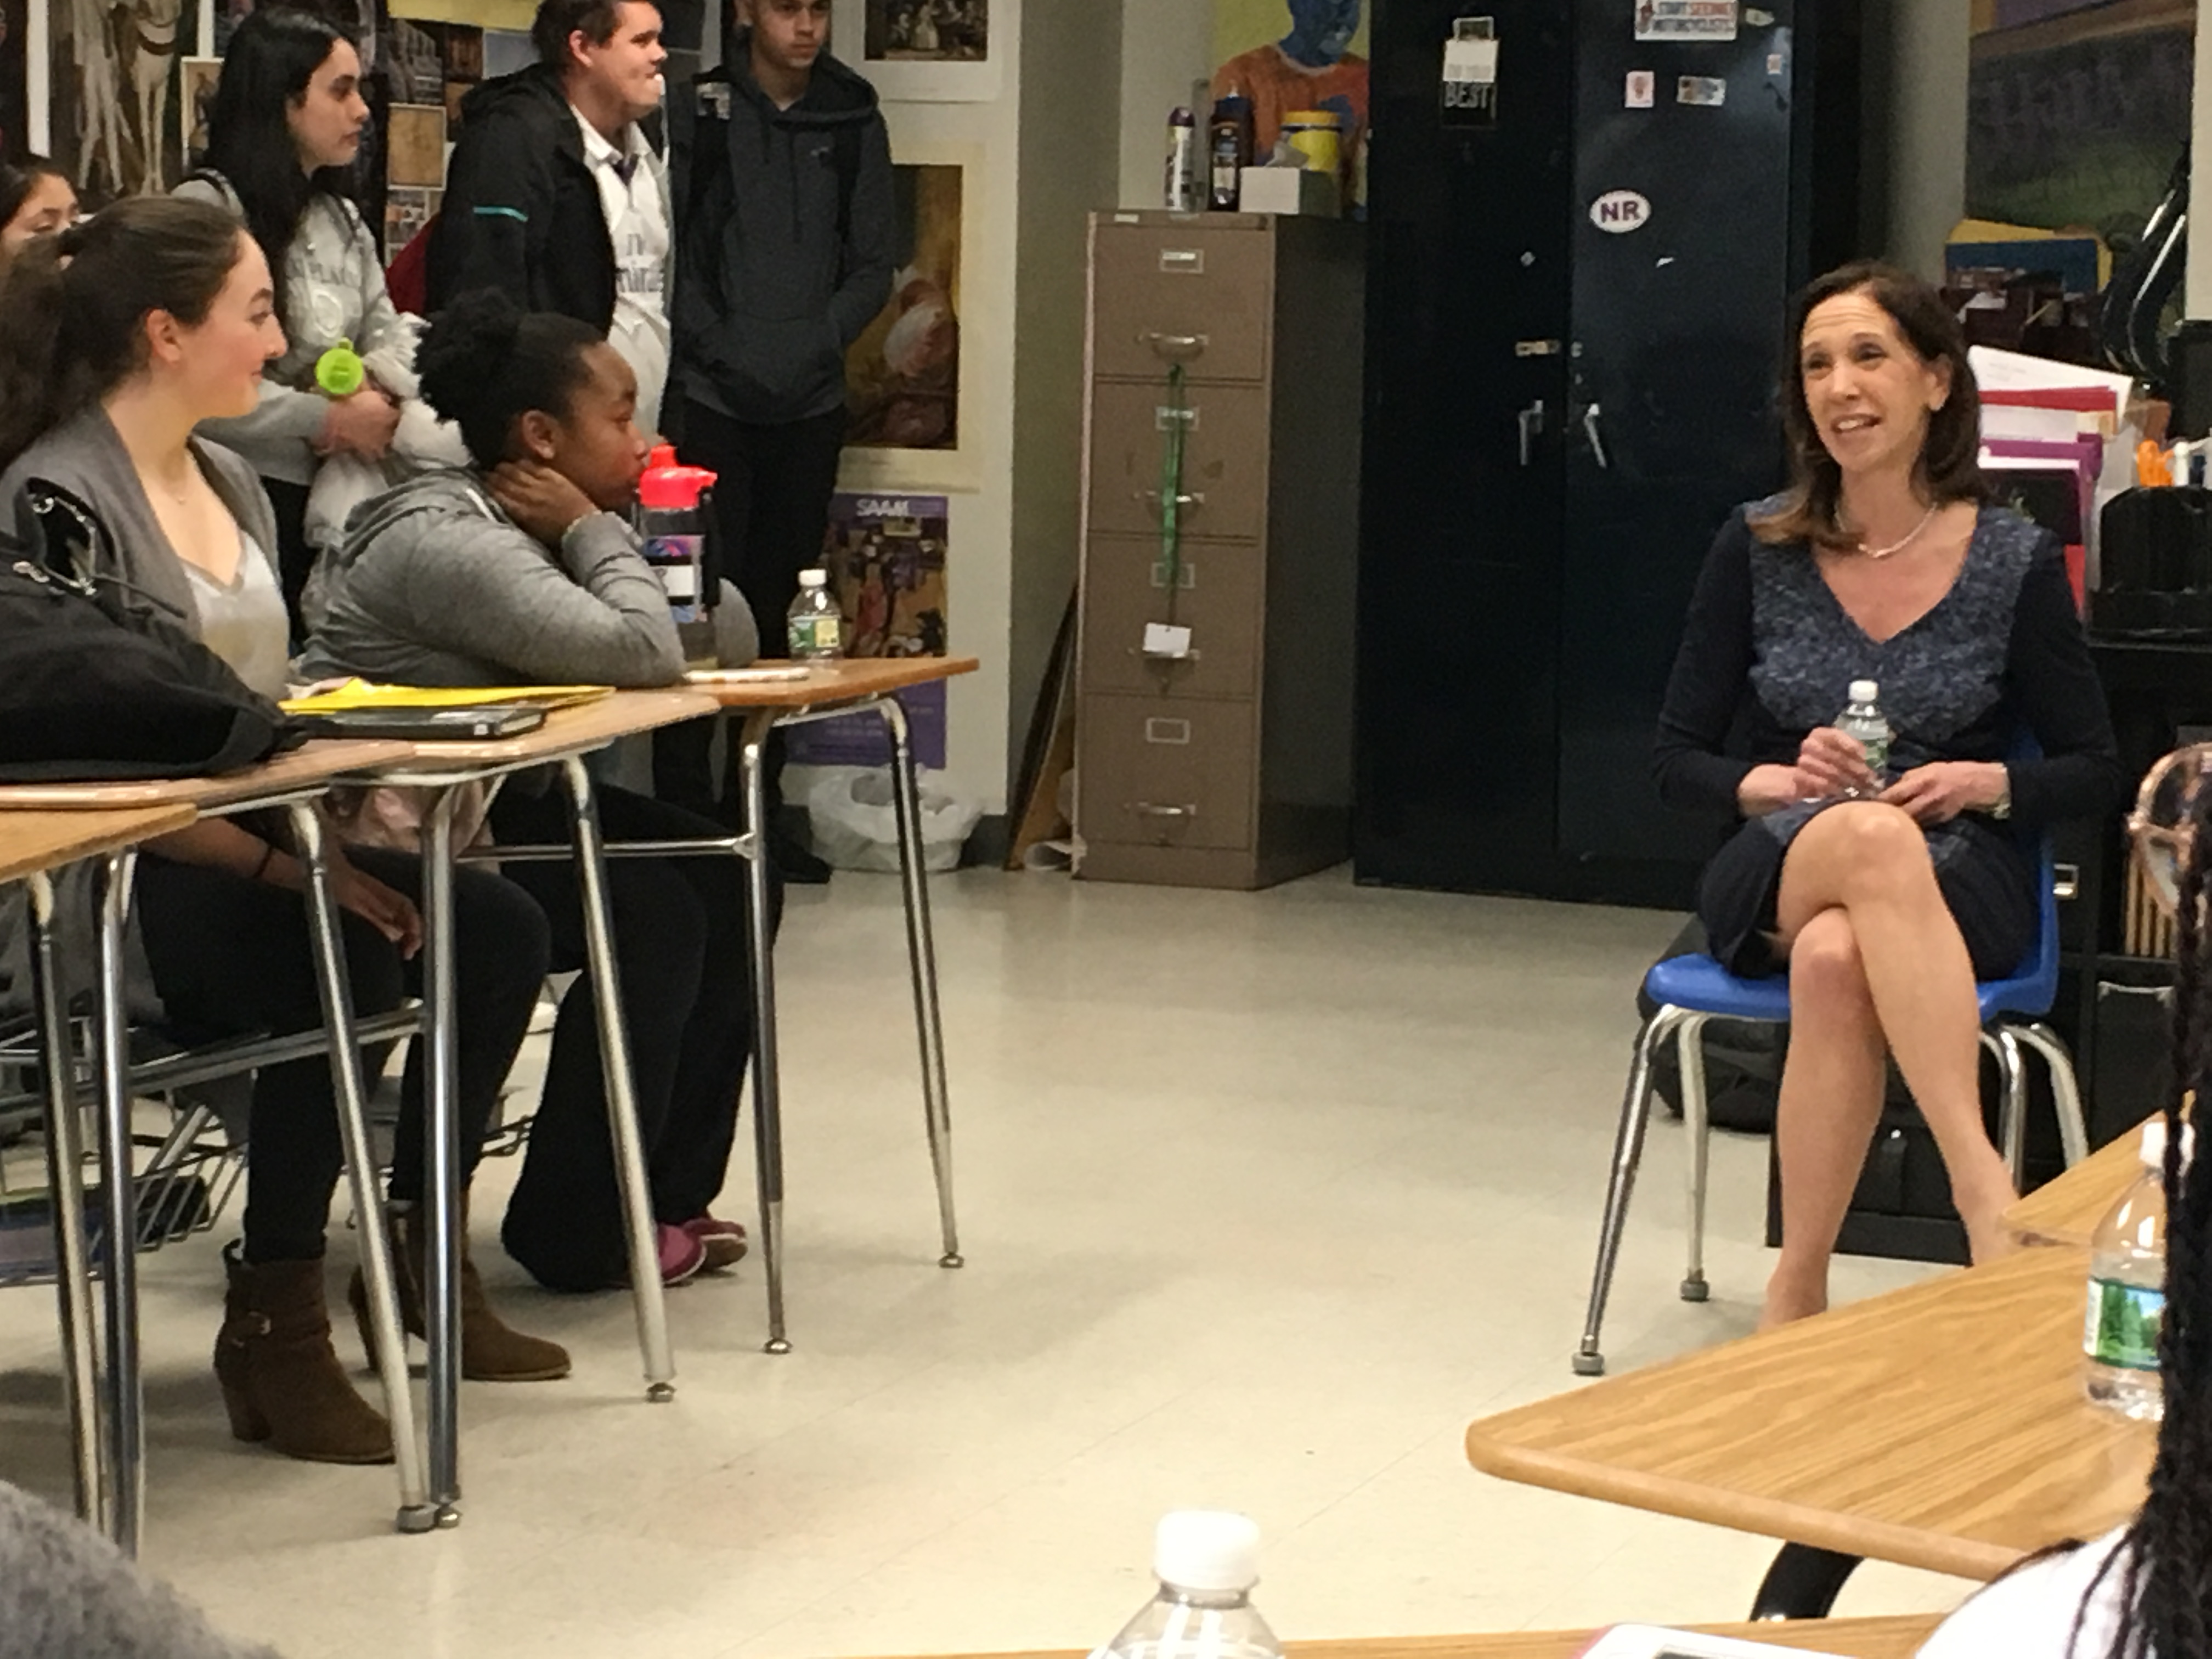 Assemblymember Amy Paulin met with the members of the FEMpowerMENT Club at New Rochelle High School on April 11, 2018 to discuss how she first decided to run for office, the barriers women legislators